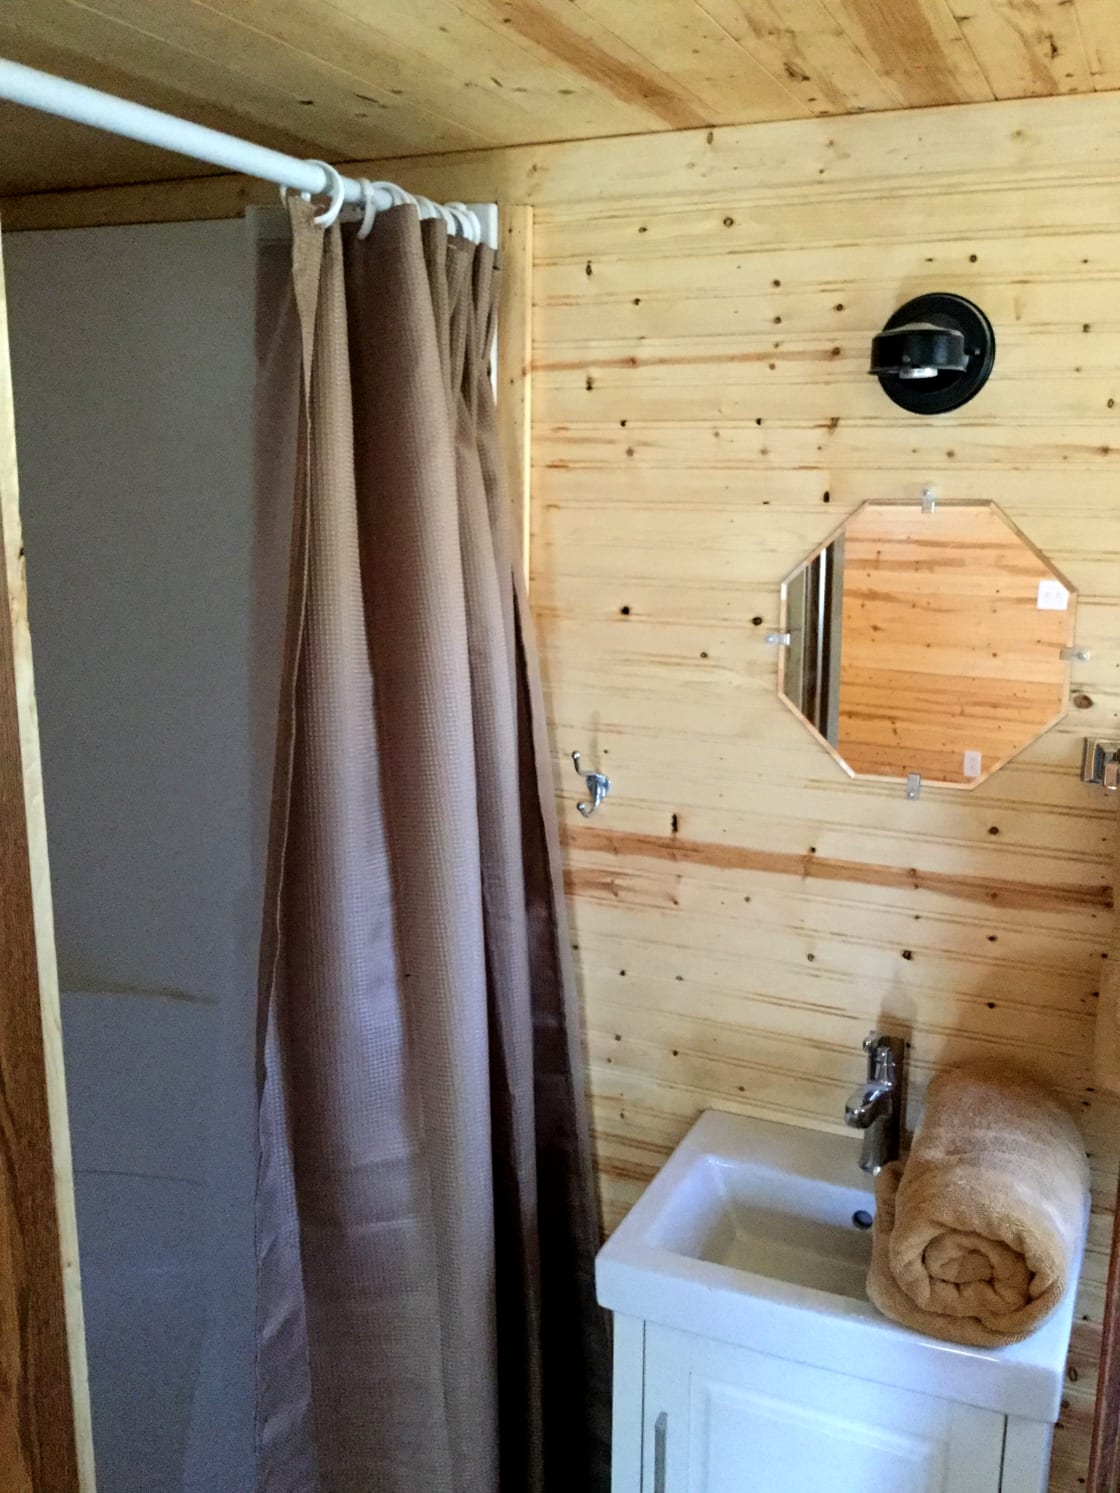 The bathroom includes a stand-up shower.